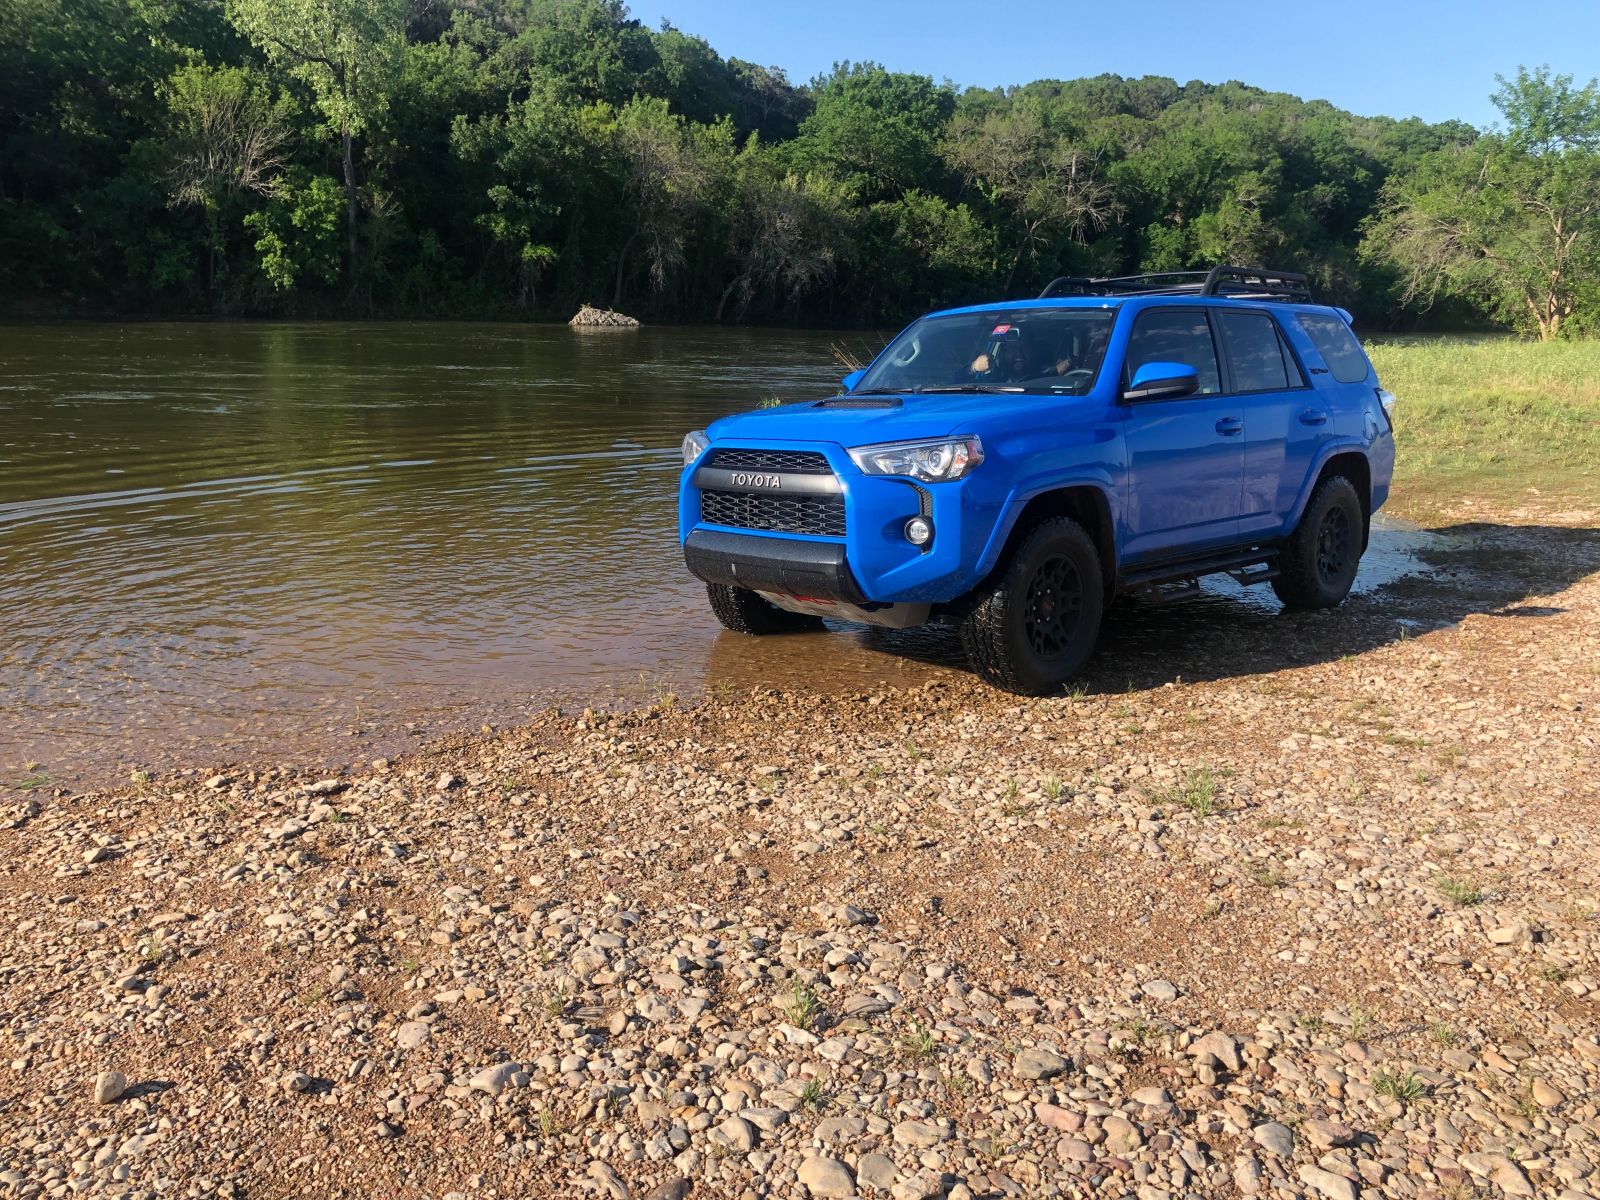 Illustration for article titled Took the new 4Runner camping this weekend